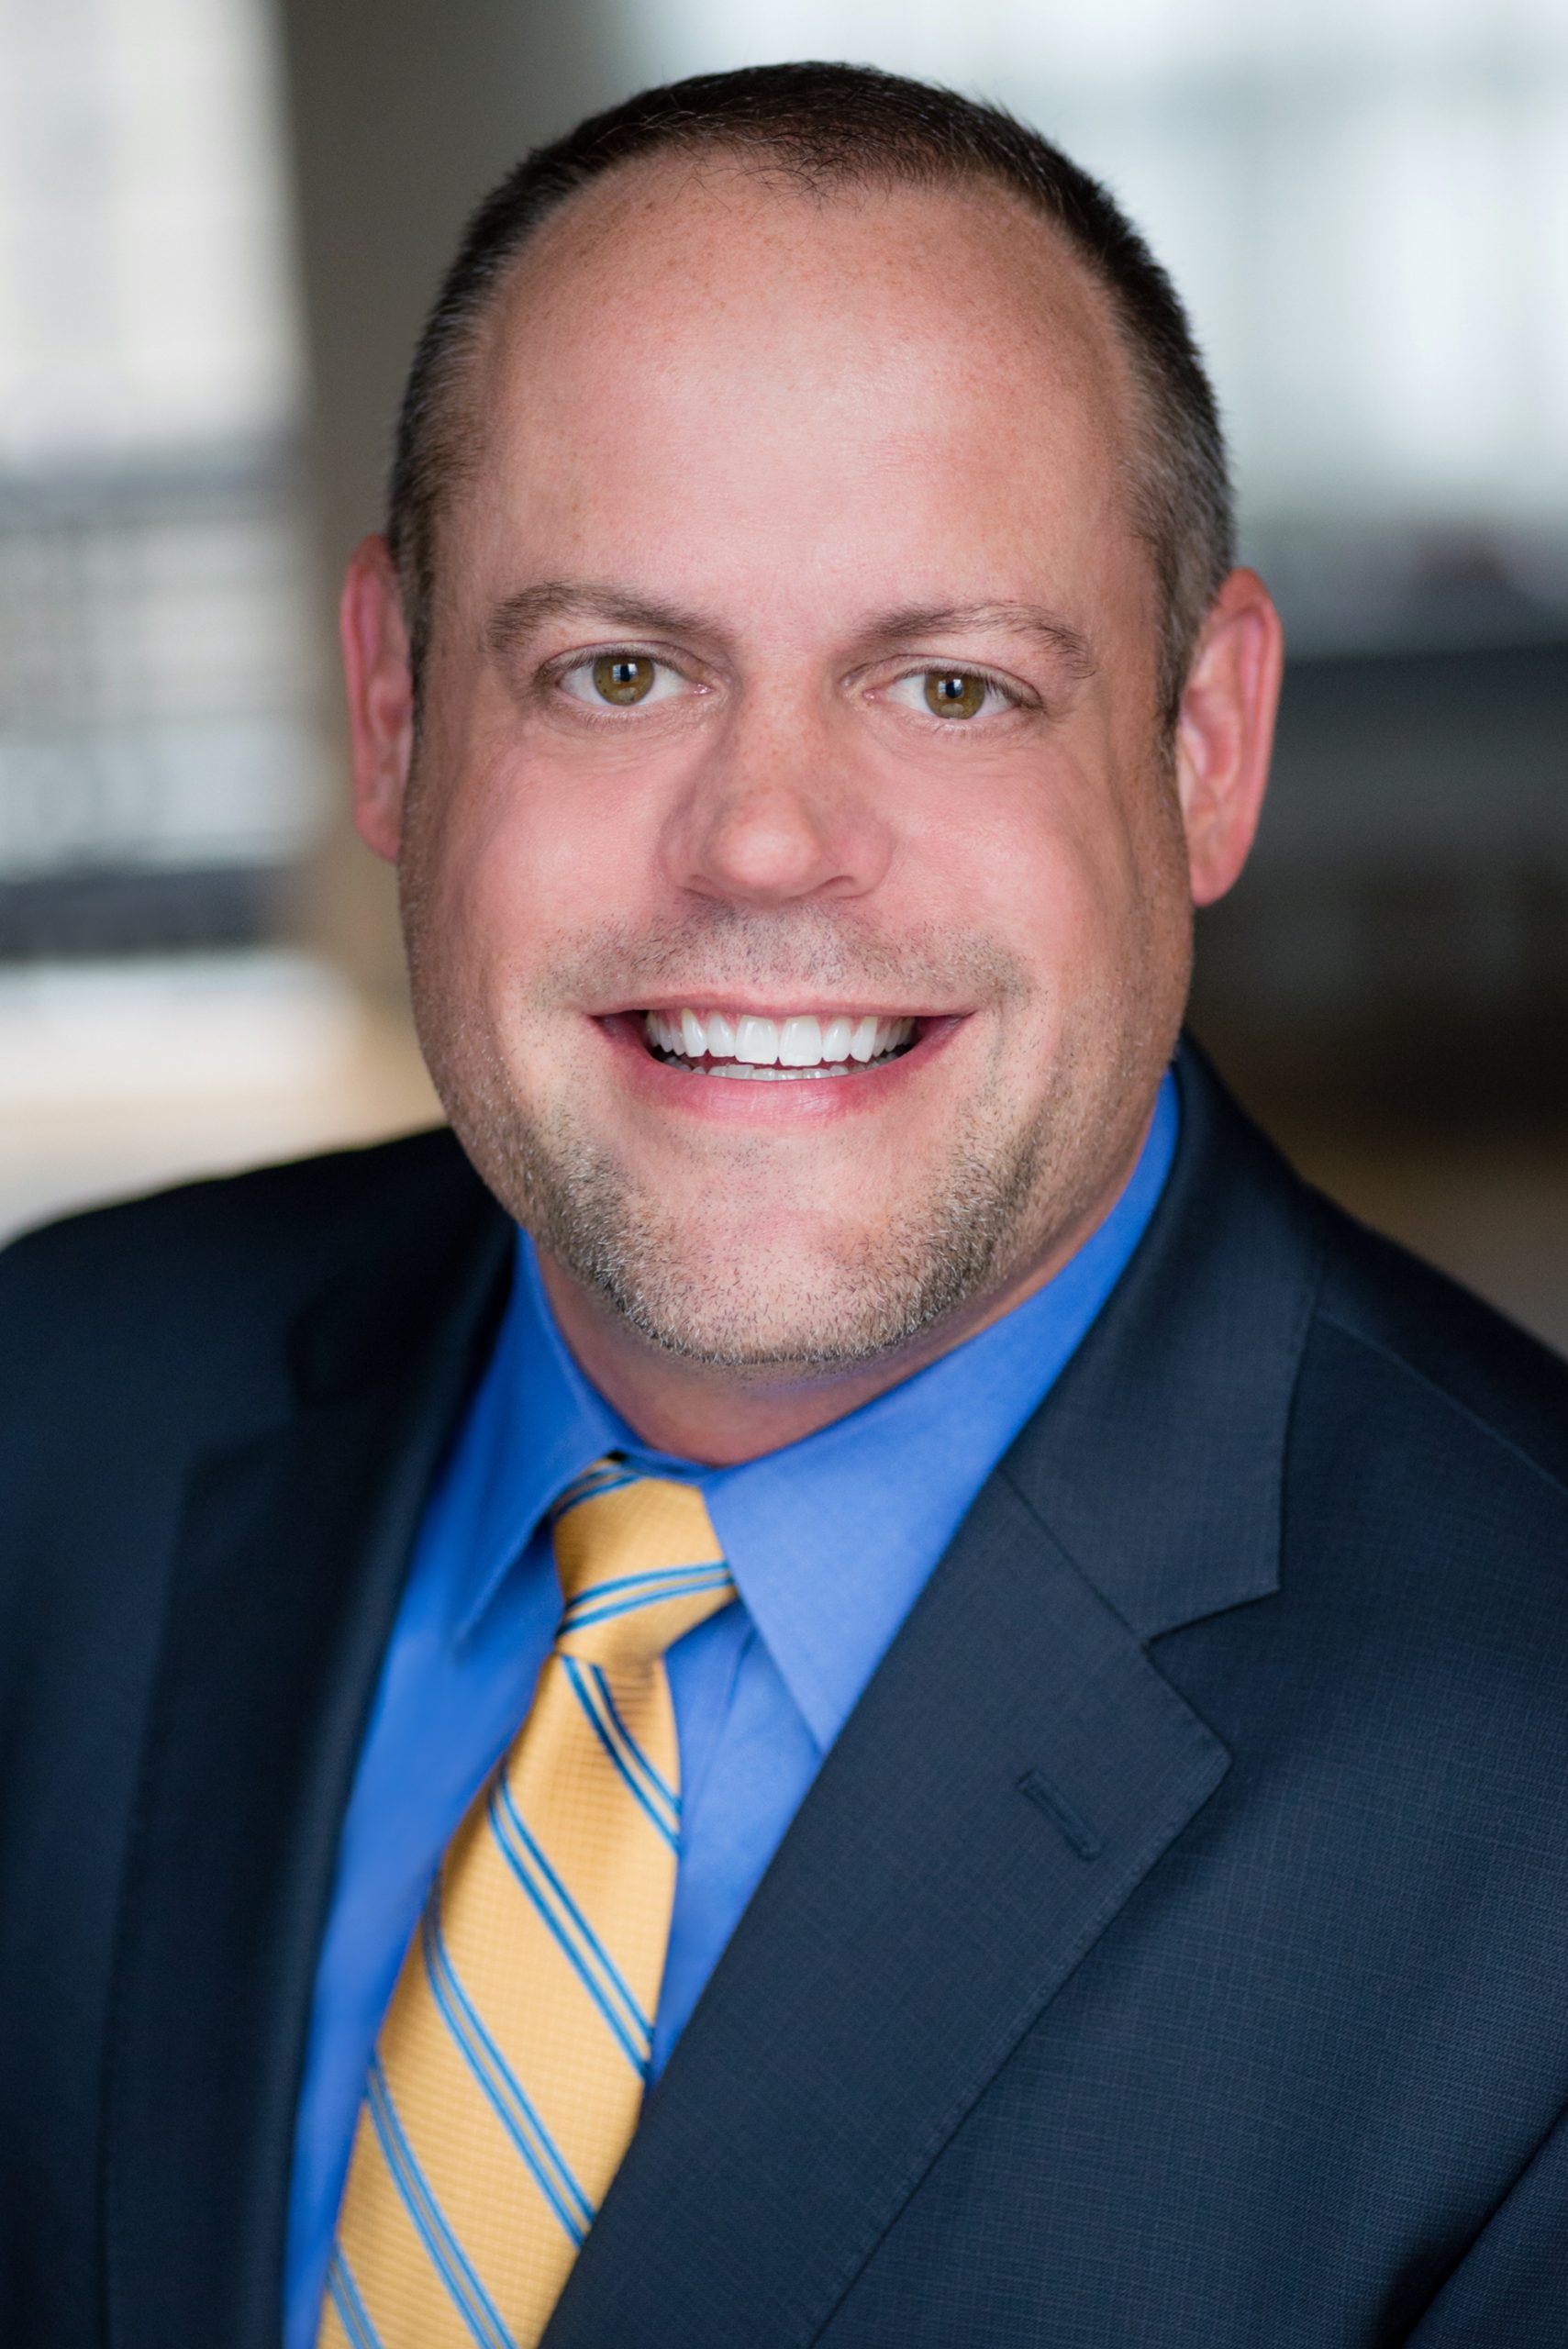 Full Color Headshot of Rob Hunden, Economic Development Professional and Business Owner from Chicago, IL. Gold striped tie, blue shirt and sport coat